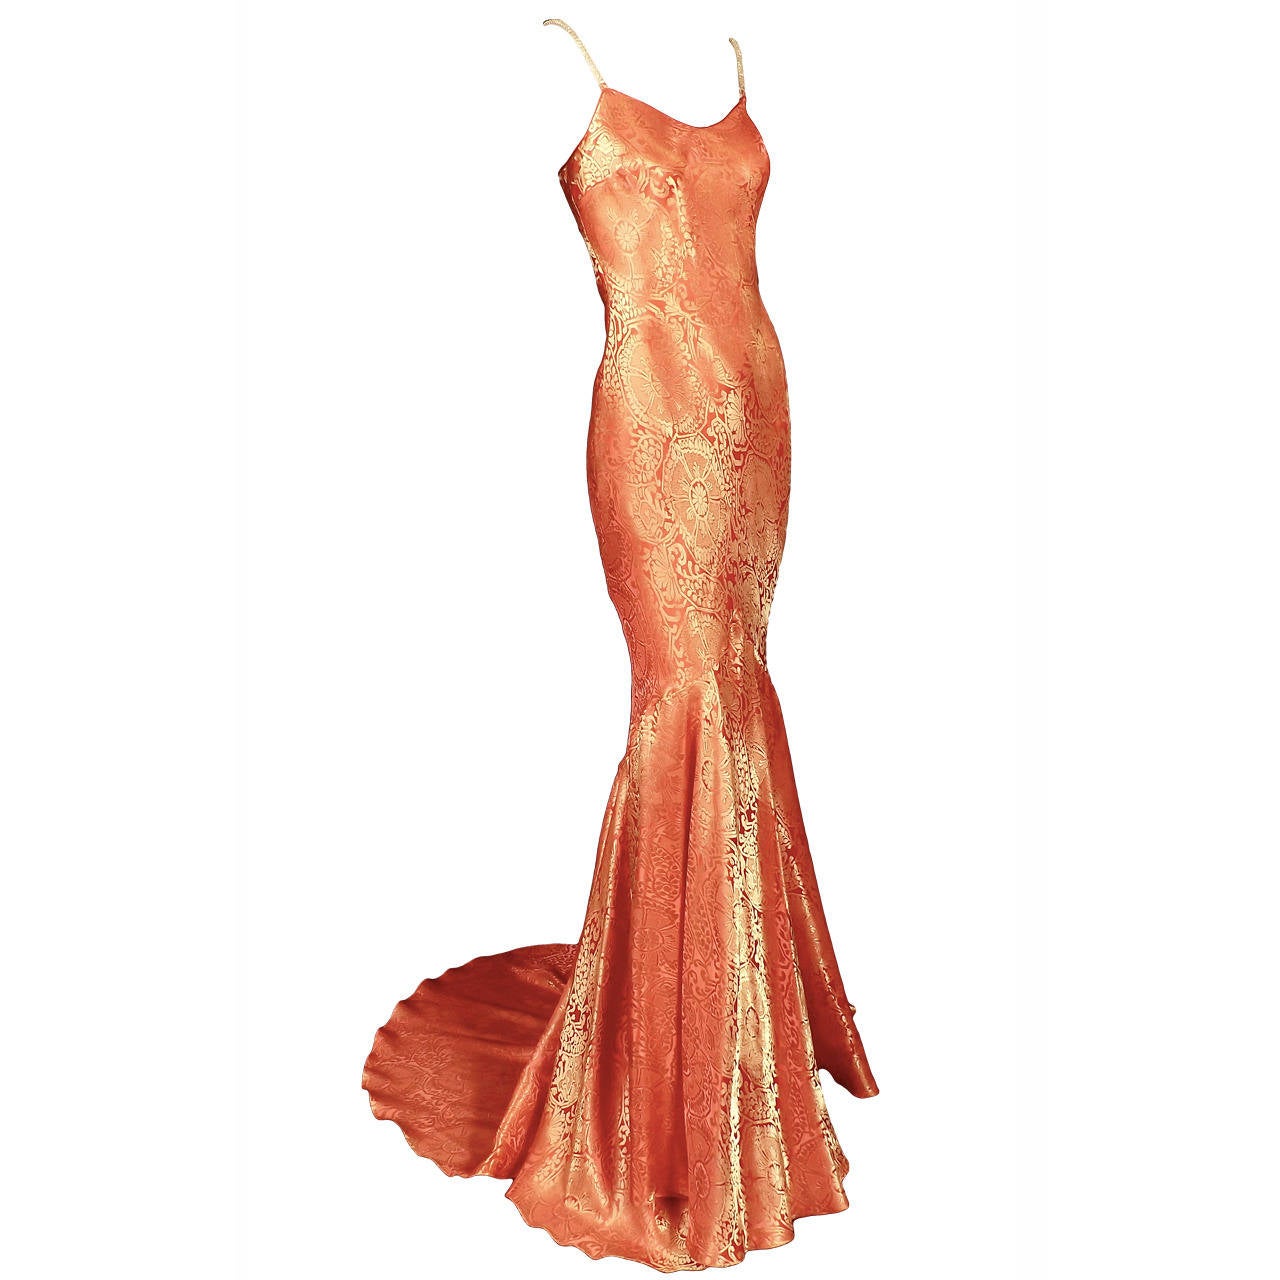 Galliano Spring 1999 Pink & Gold Brocade Bias Evening Gown